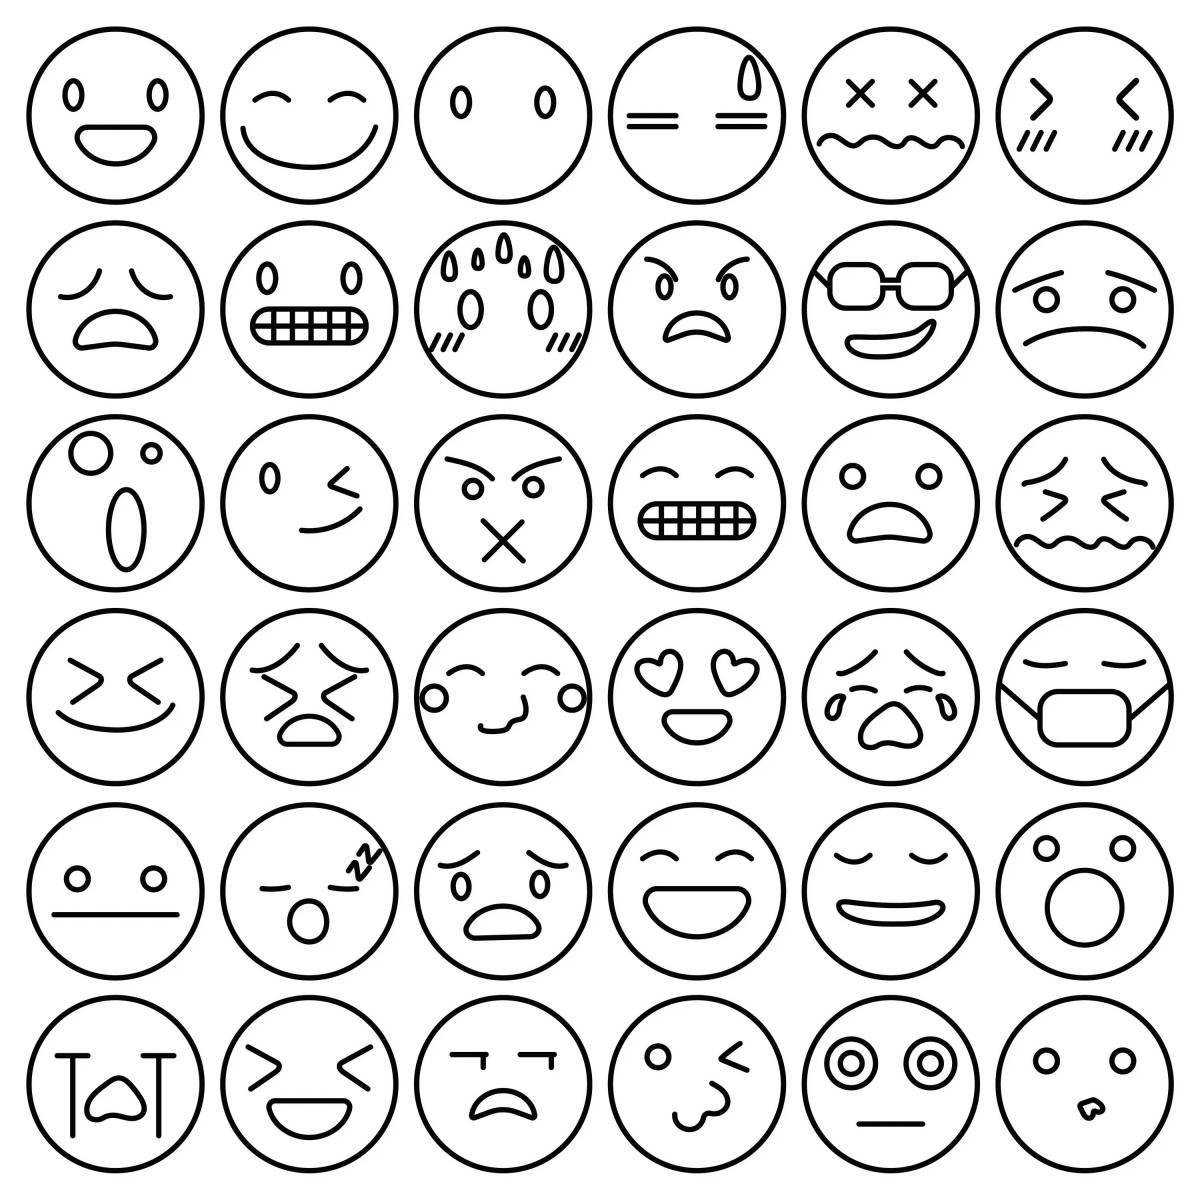 Coloring page for colorful emoticons